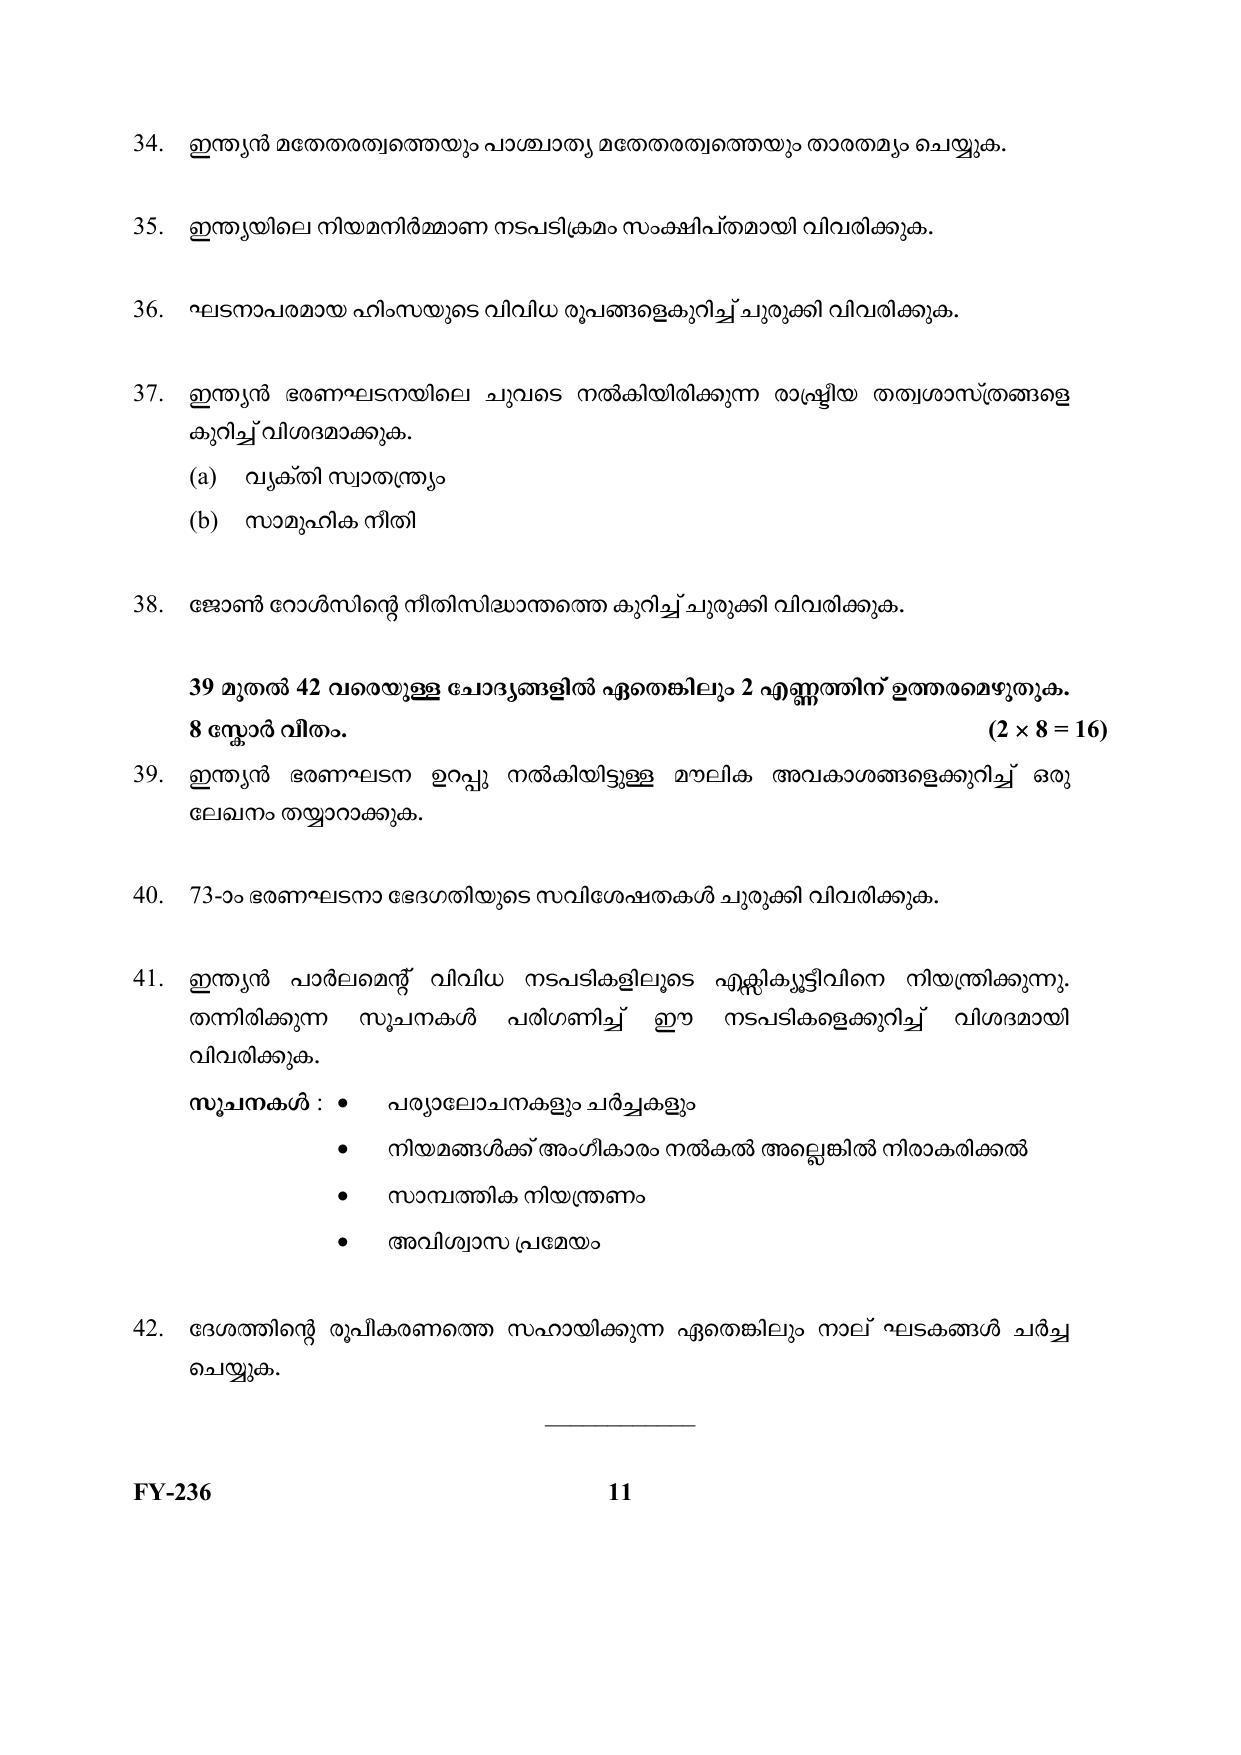 Kerala Plus One (Class 11th) Political Science Question Paper 2021 - Page 11